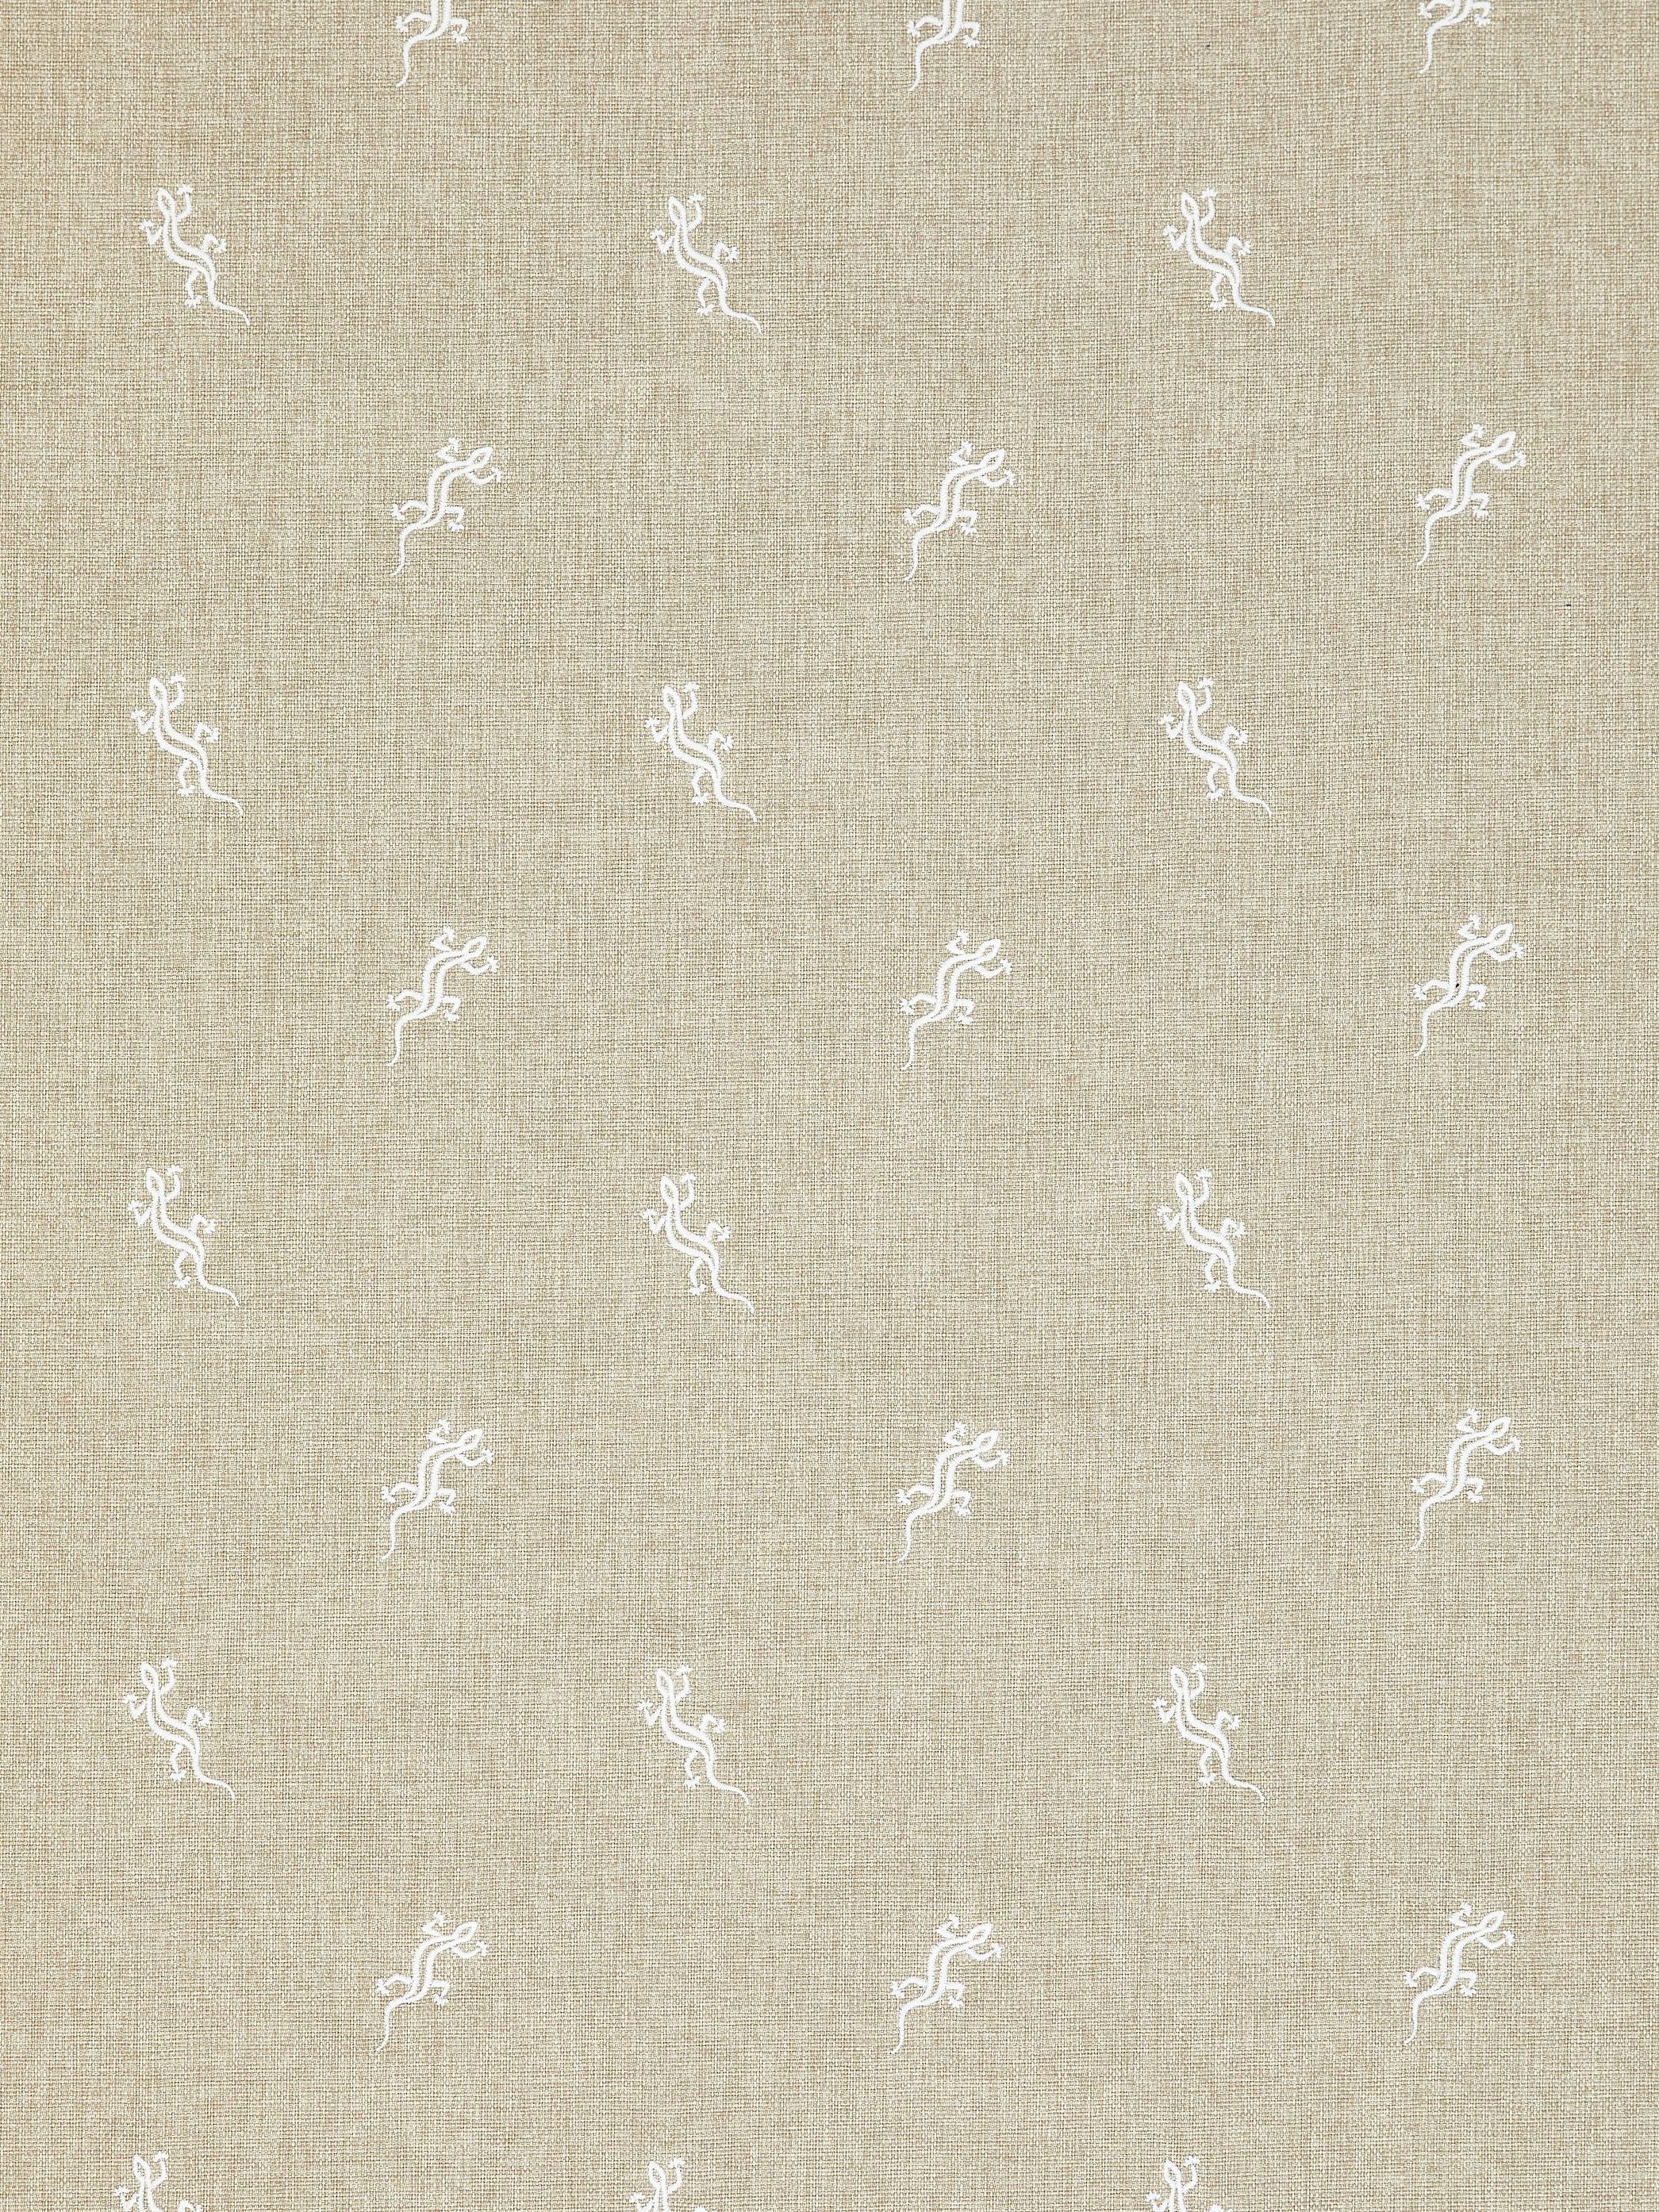 Gecko Embroidery Outdoor fabric in limestone color - pattern number SC 000127319 - by Scalamandre in the Scalamandre Fabrics Book 1 collection